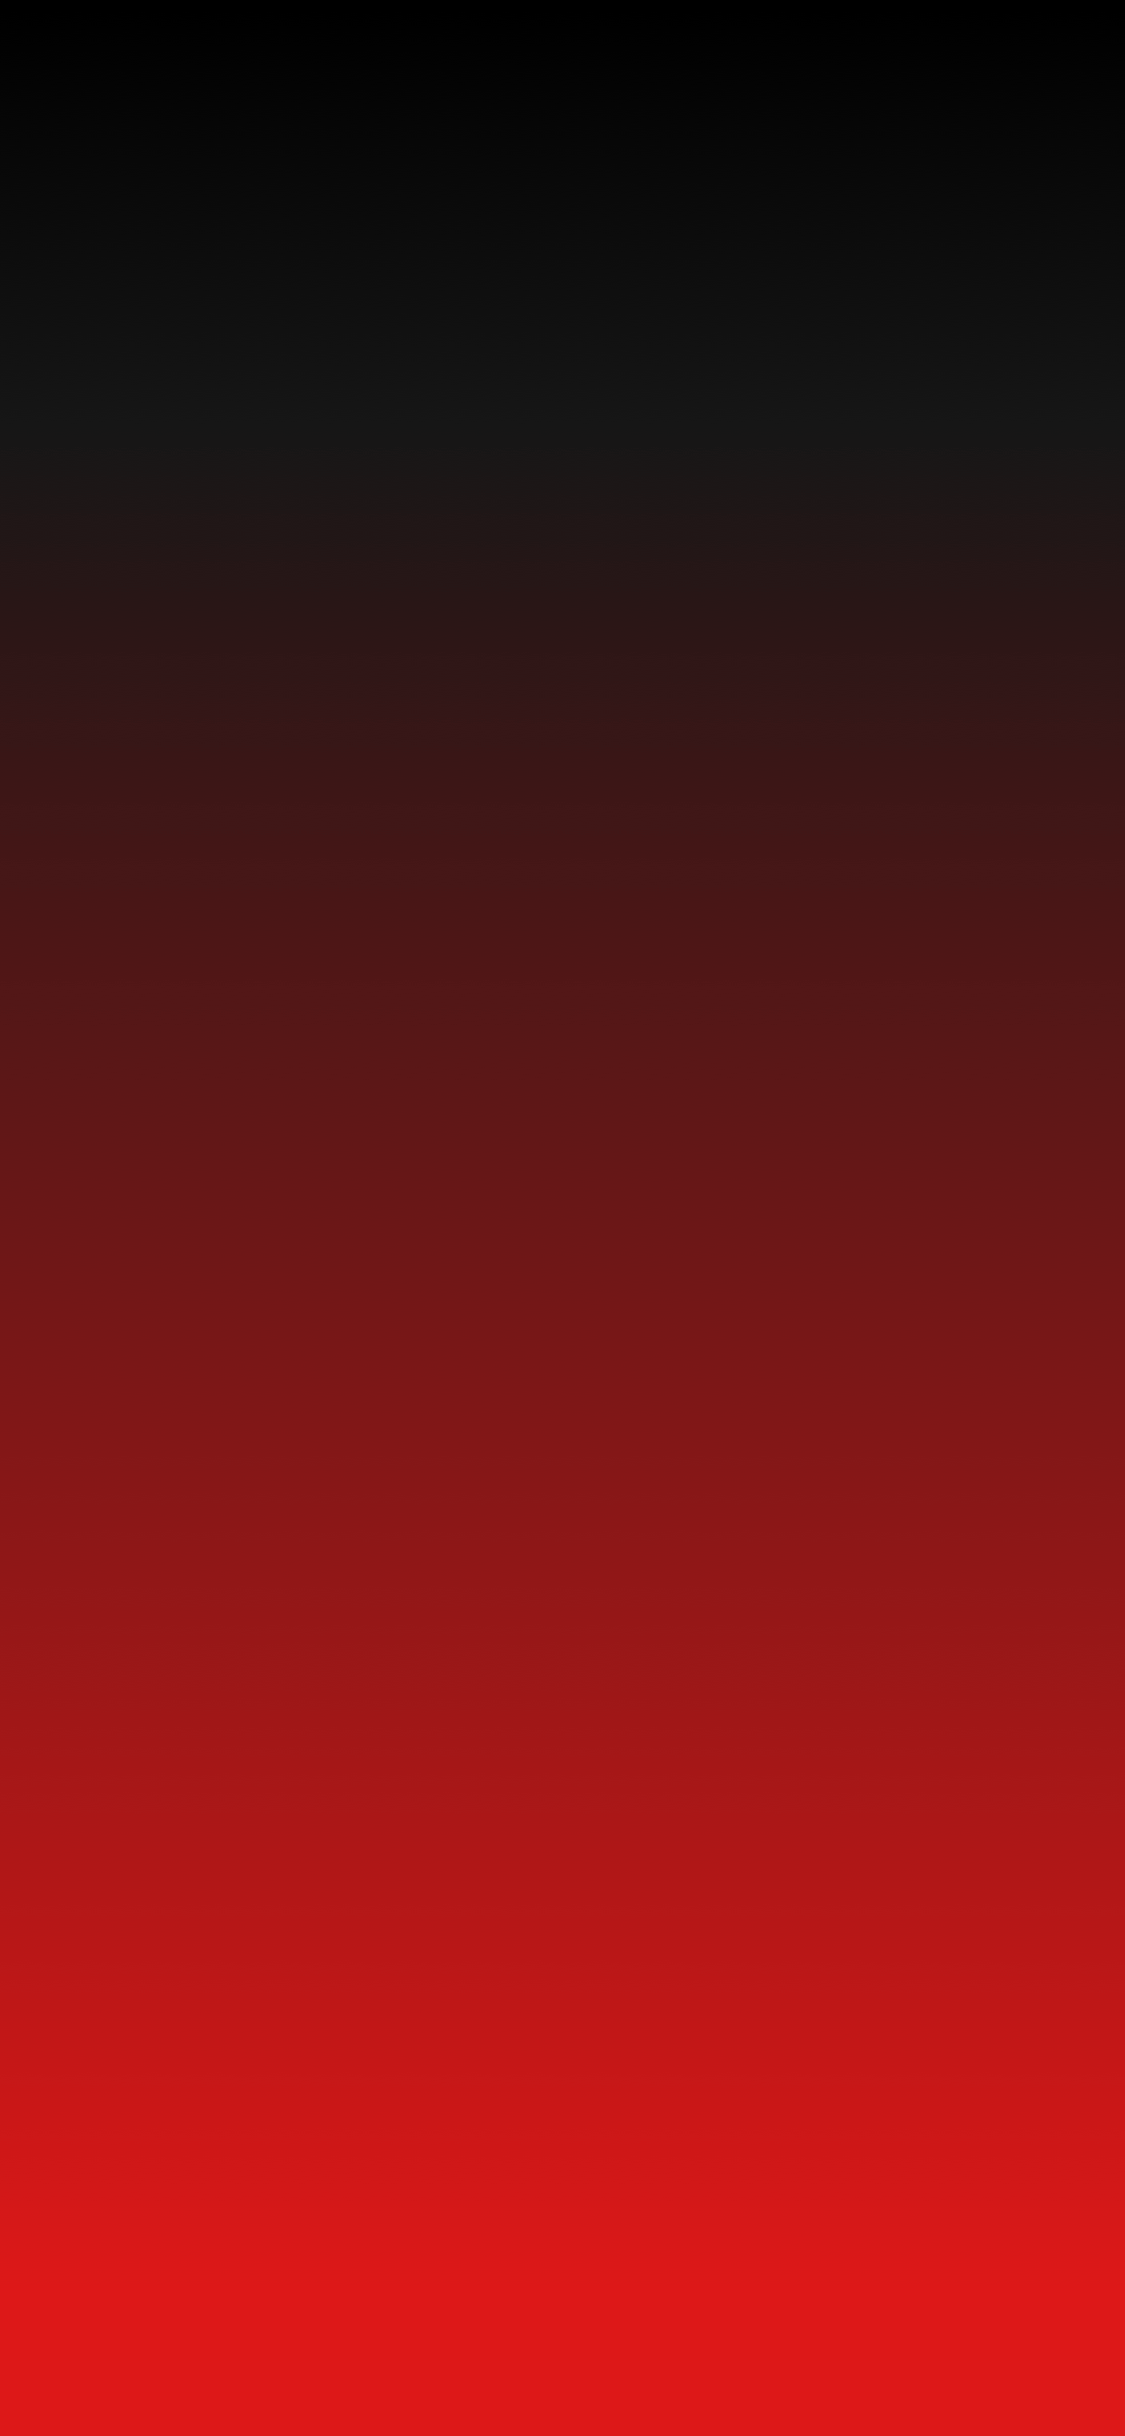 Red Gradient iPhone Wallpaper Free Red Gradient iPhone Background